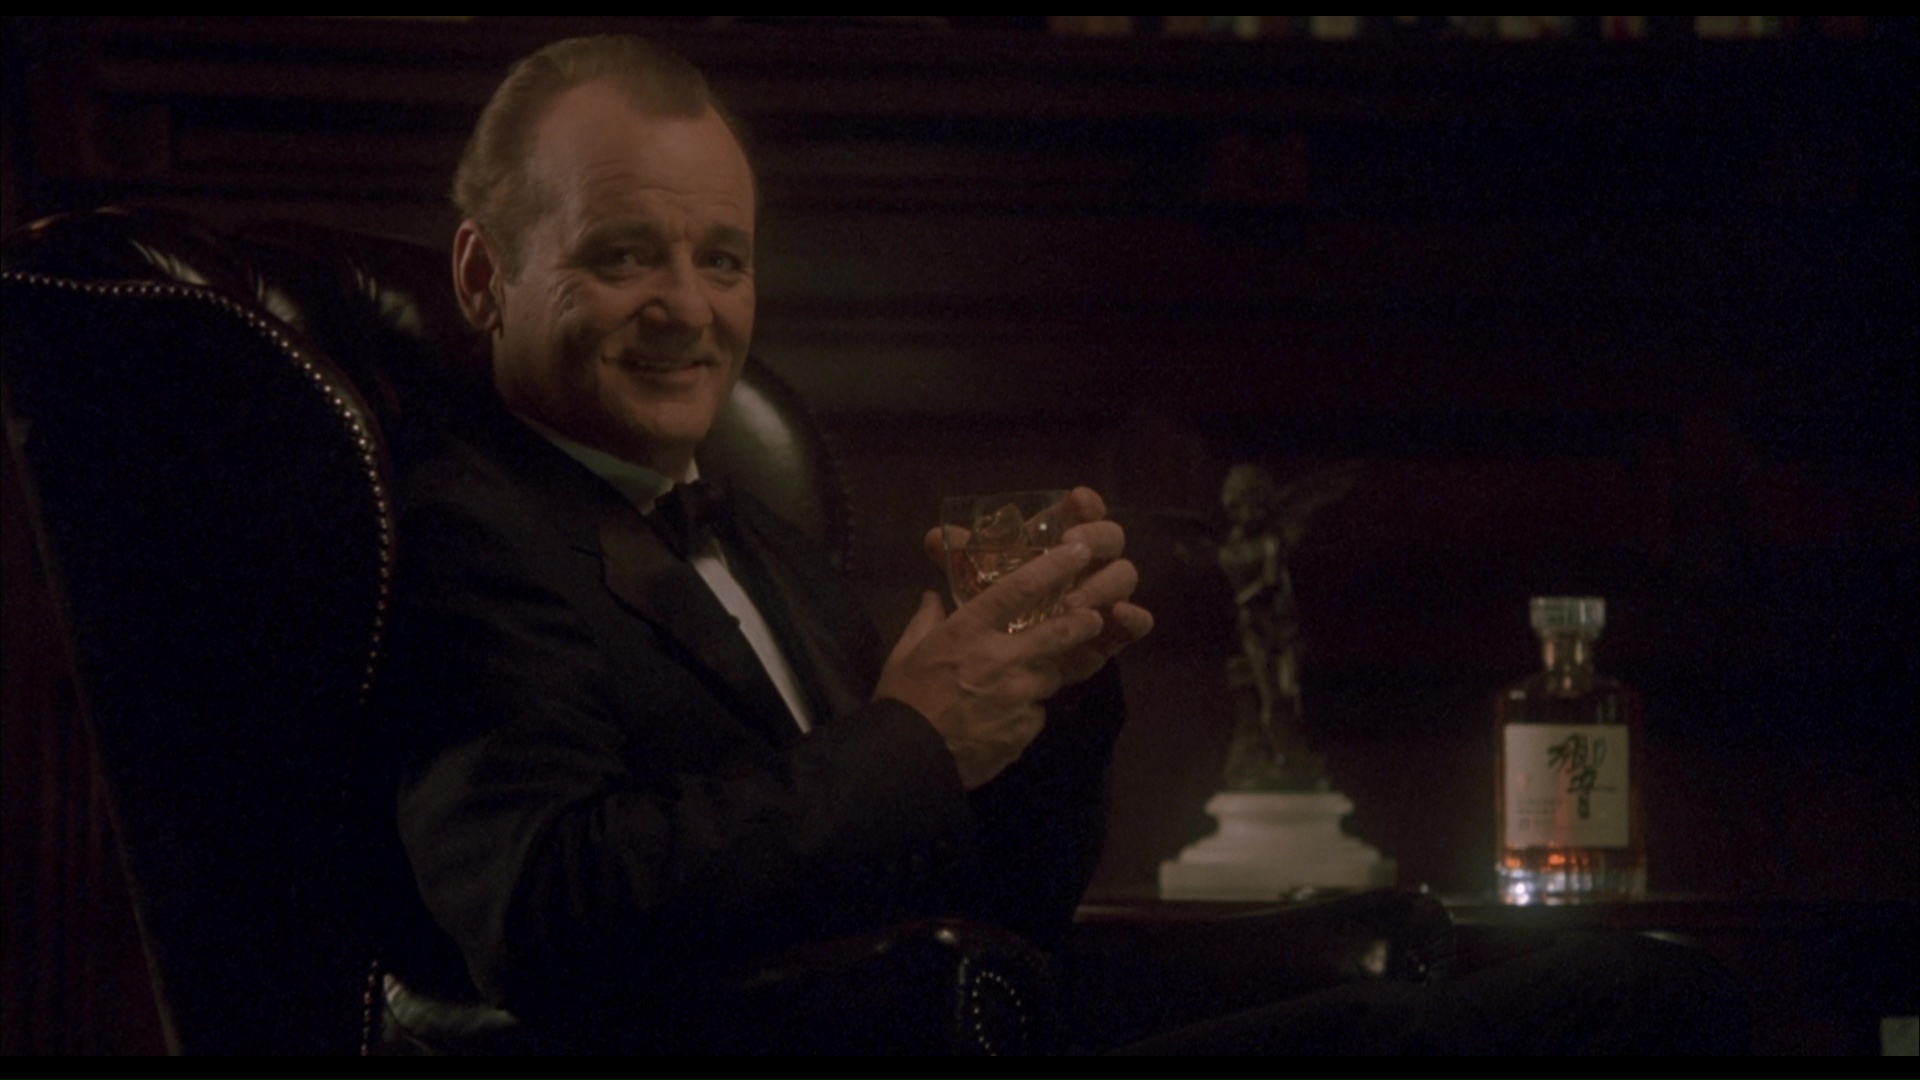 Suntory Japanese Whisky and Bill Murray in Lost in Translation (2003) Movie1920 x 1080